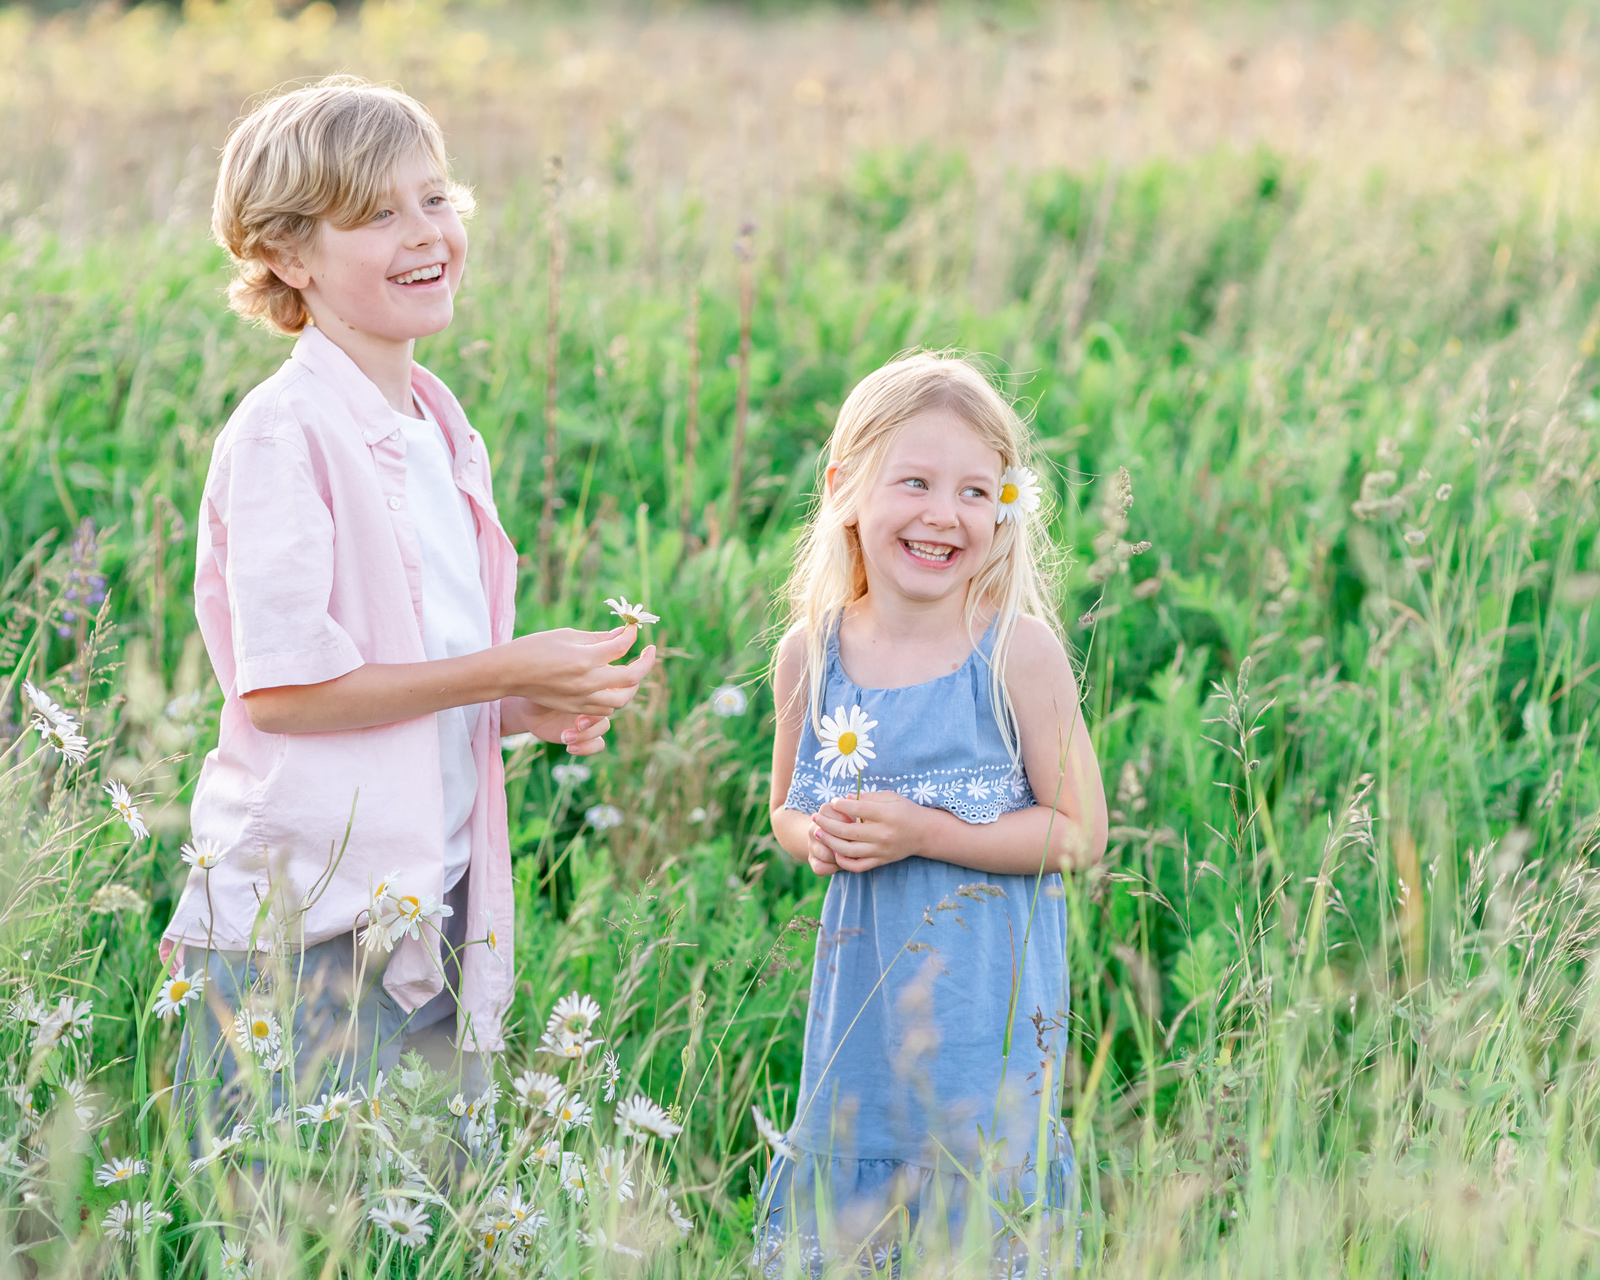 Vancouver family photos outdoors in flower field